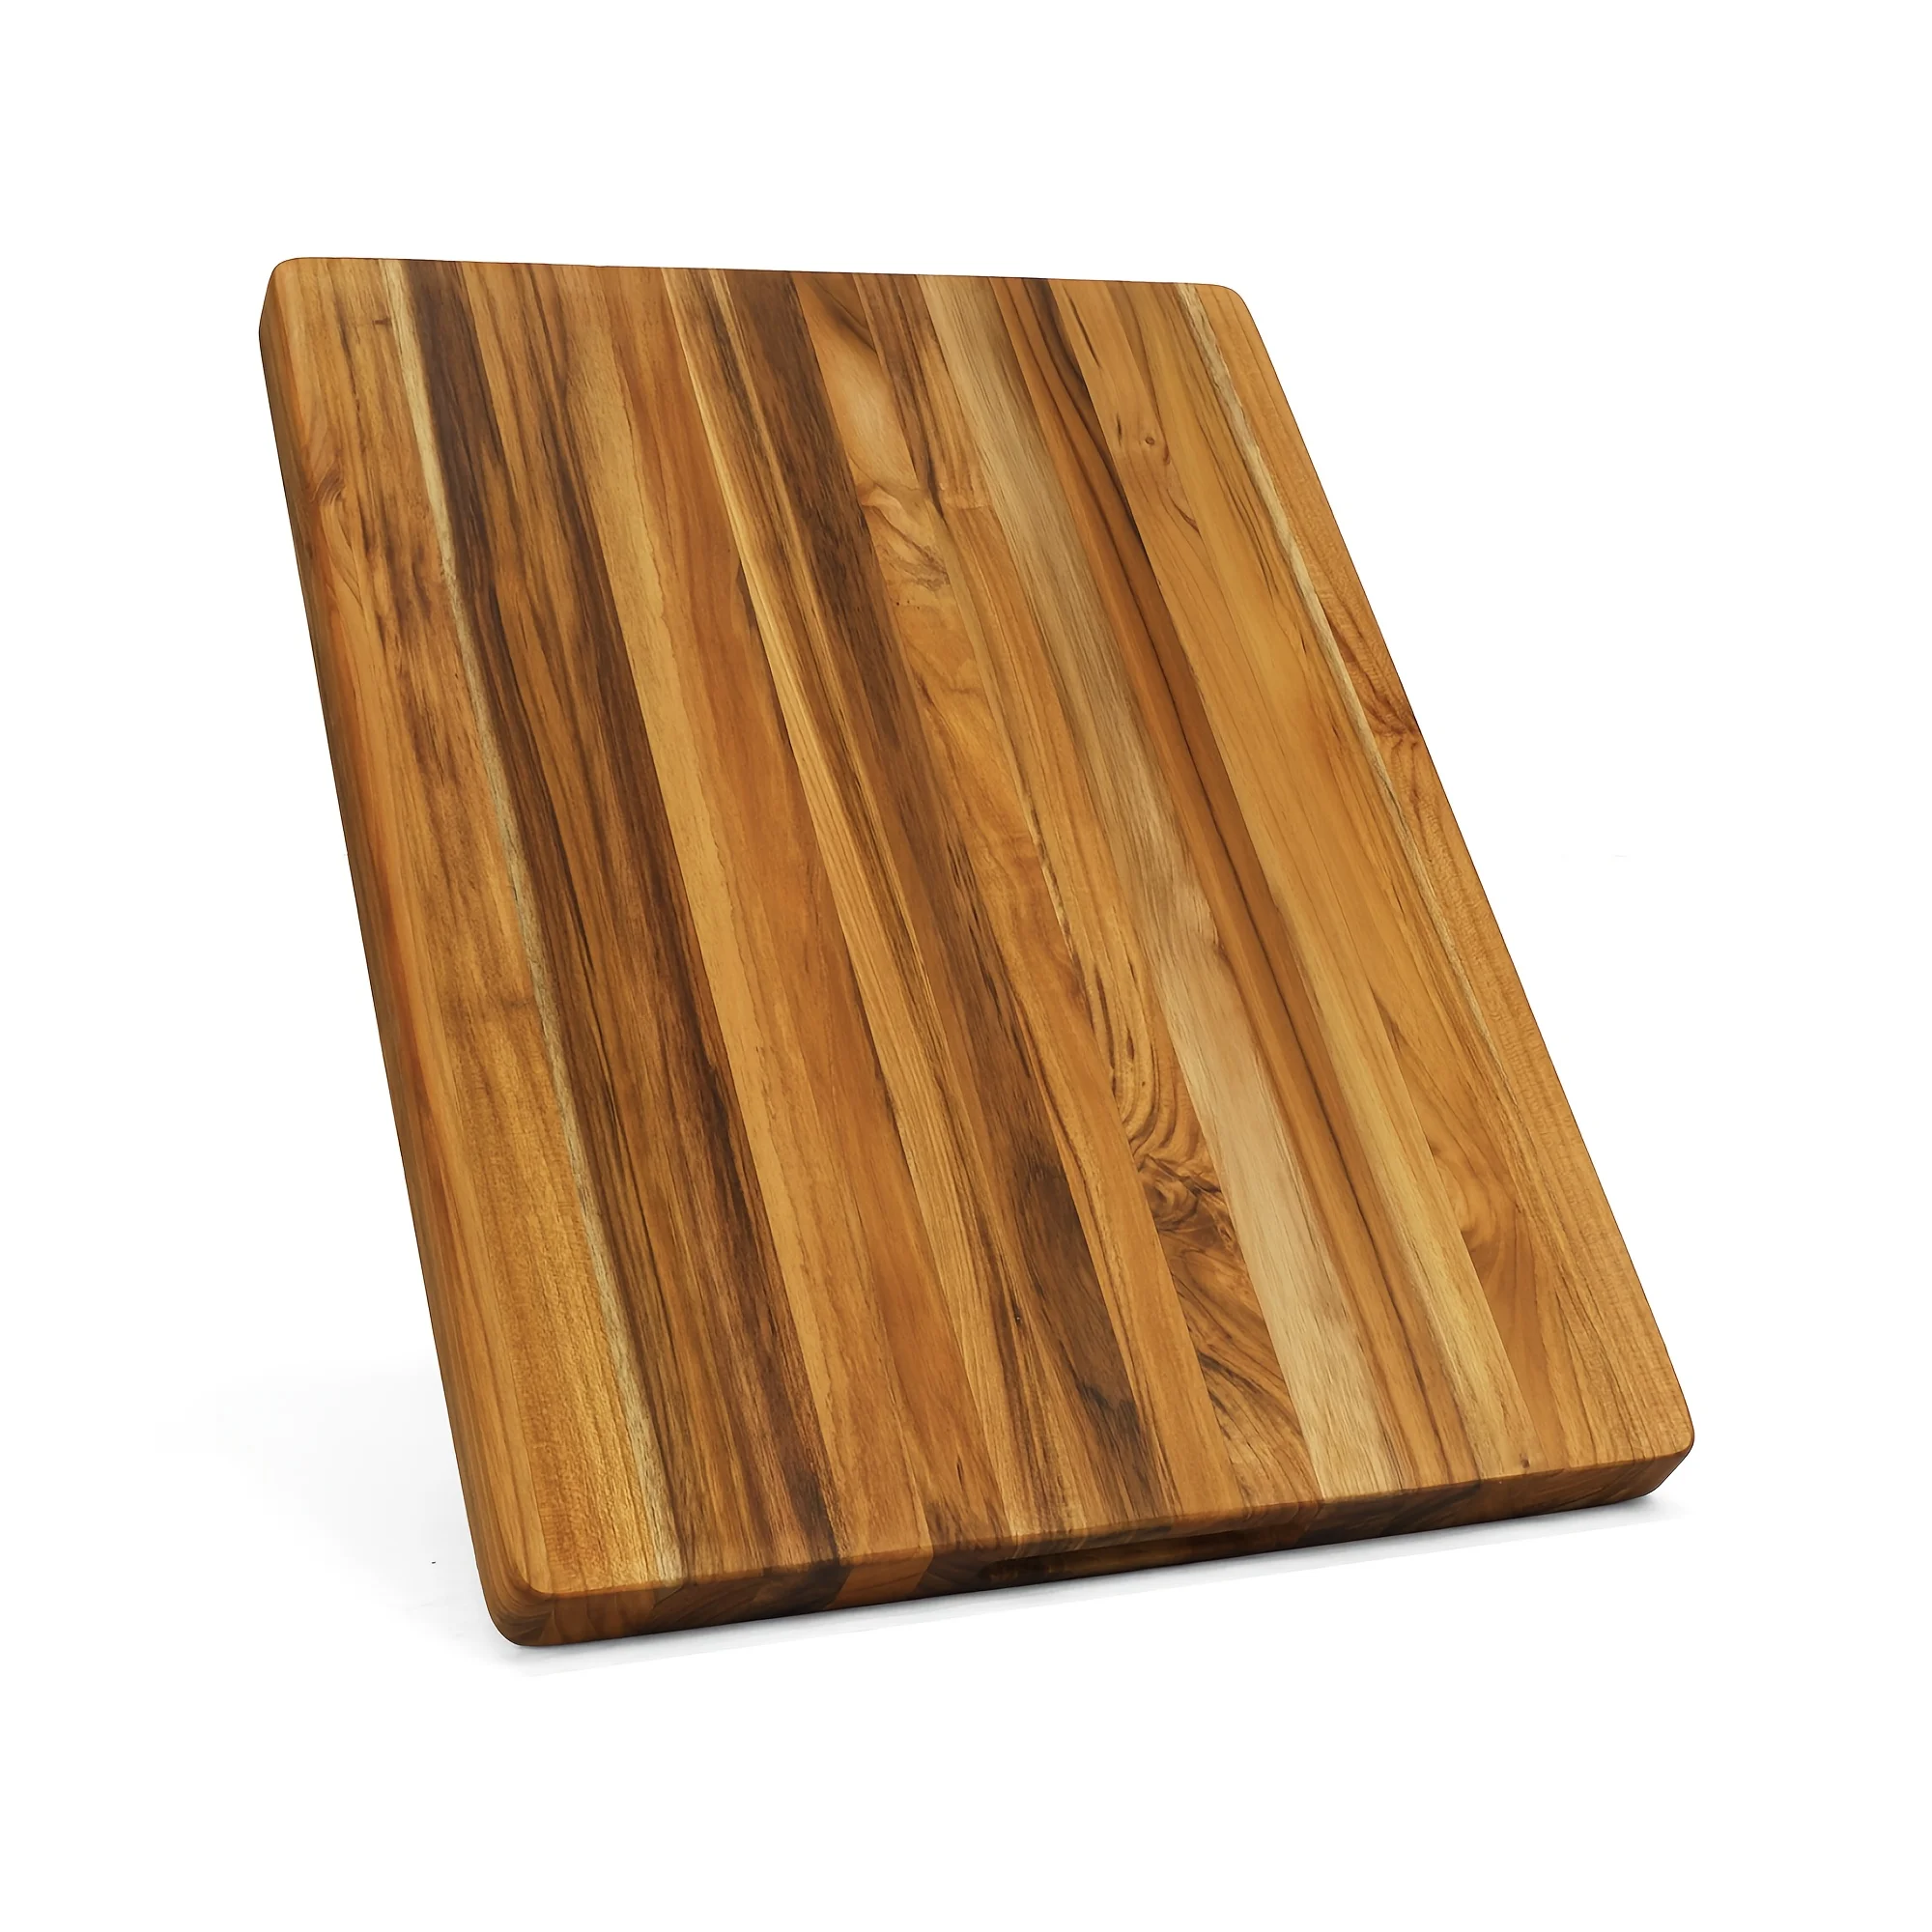 

Cutting Board Reversible Chopping Serving Board Multipurpose Food Safe Thick Board, Medium Size 20x15x1.25 inches